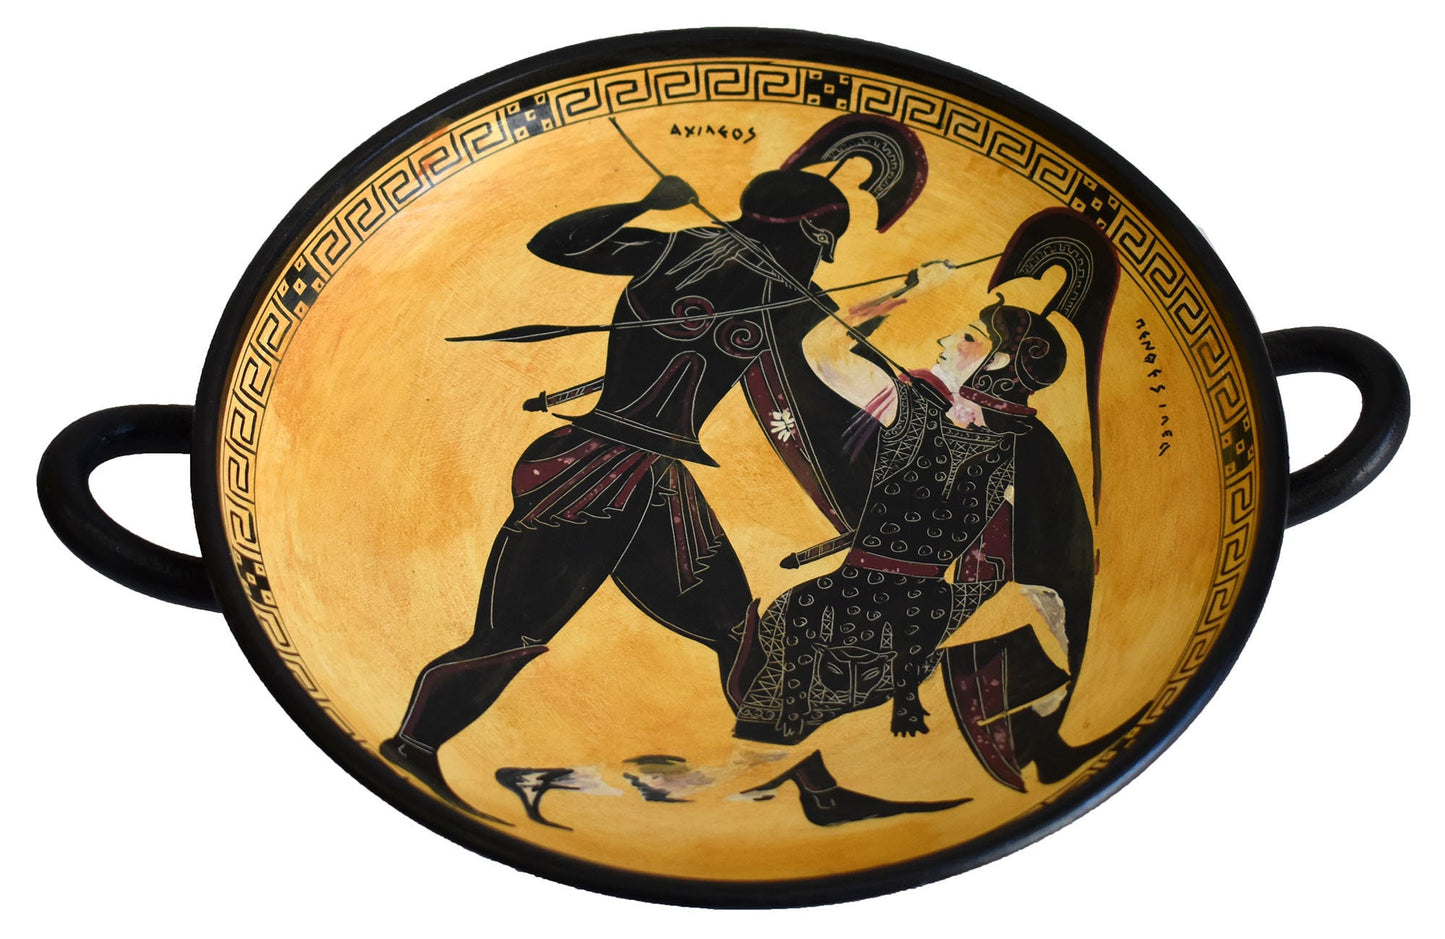 Achilles and Penthesileia, Queen of the Amazons - Homer's Iliad - Black Figure small Kylix Vase by Exekias - British Museum Replica